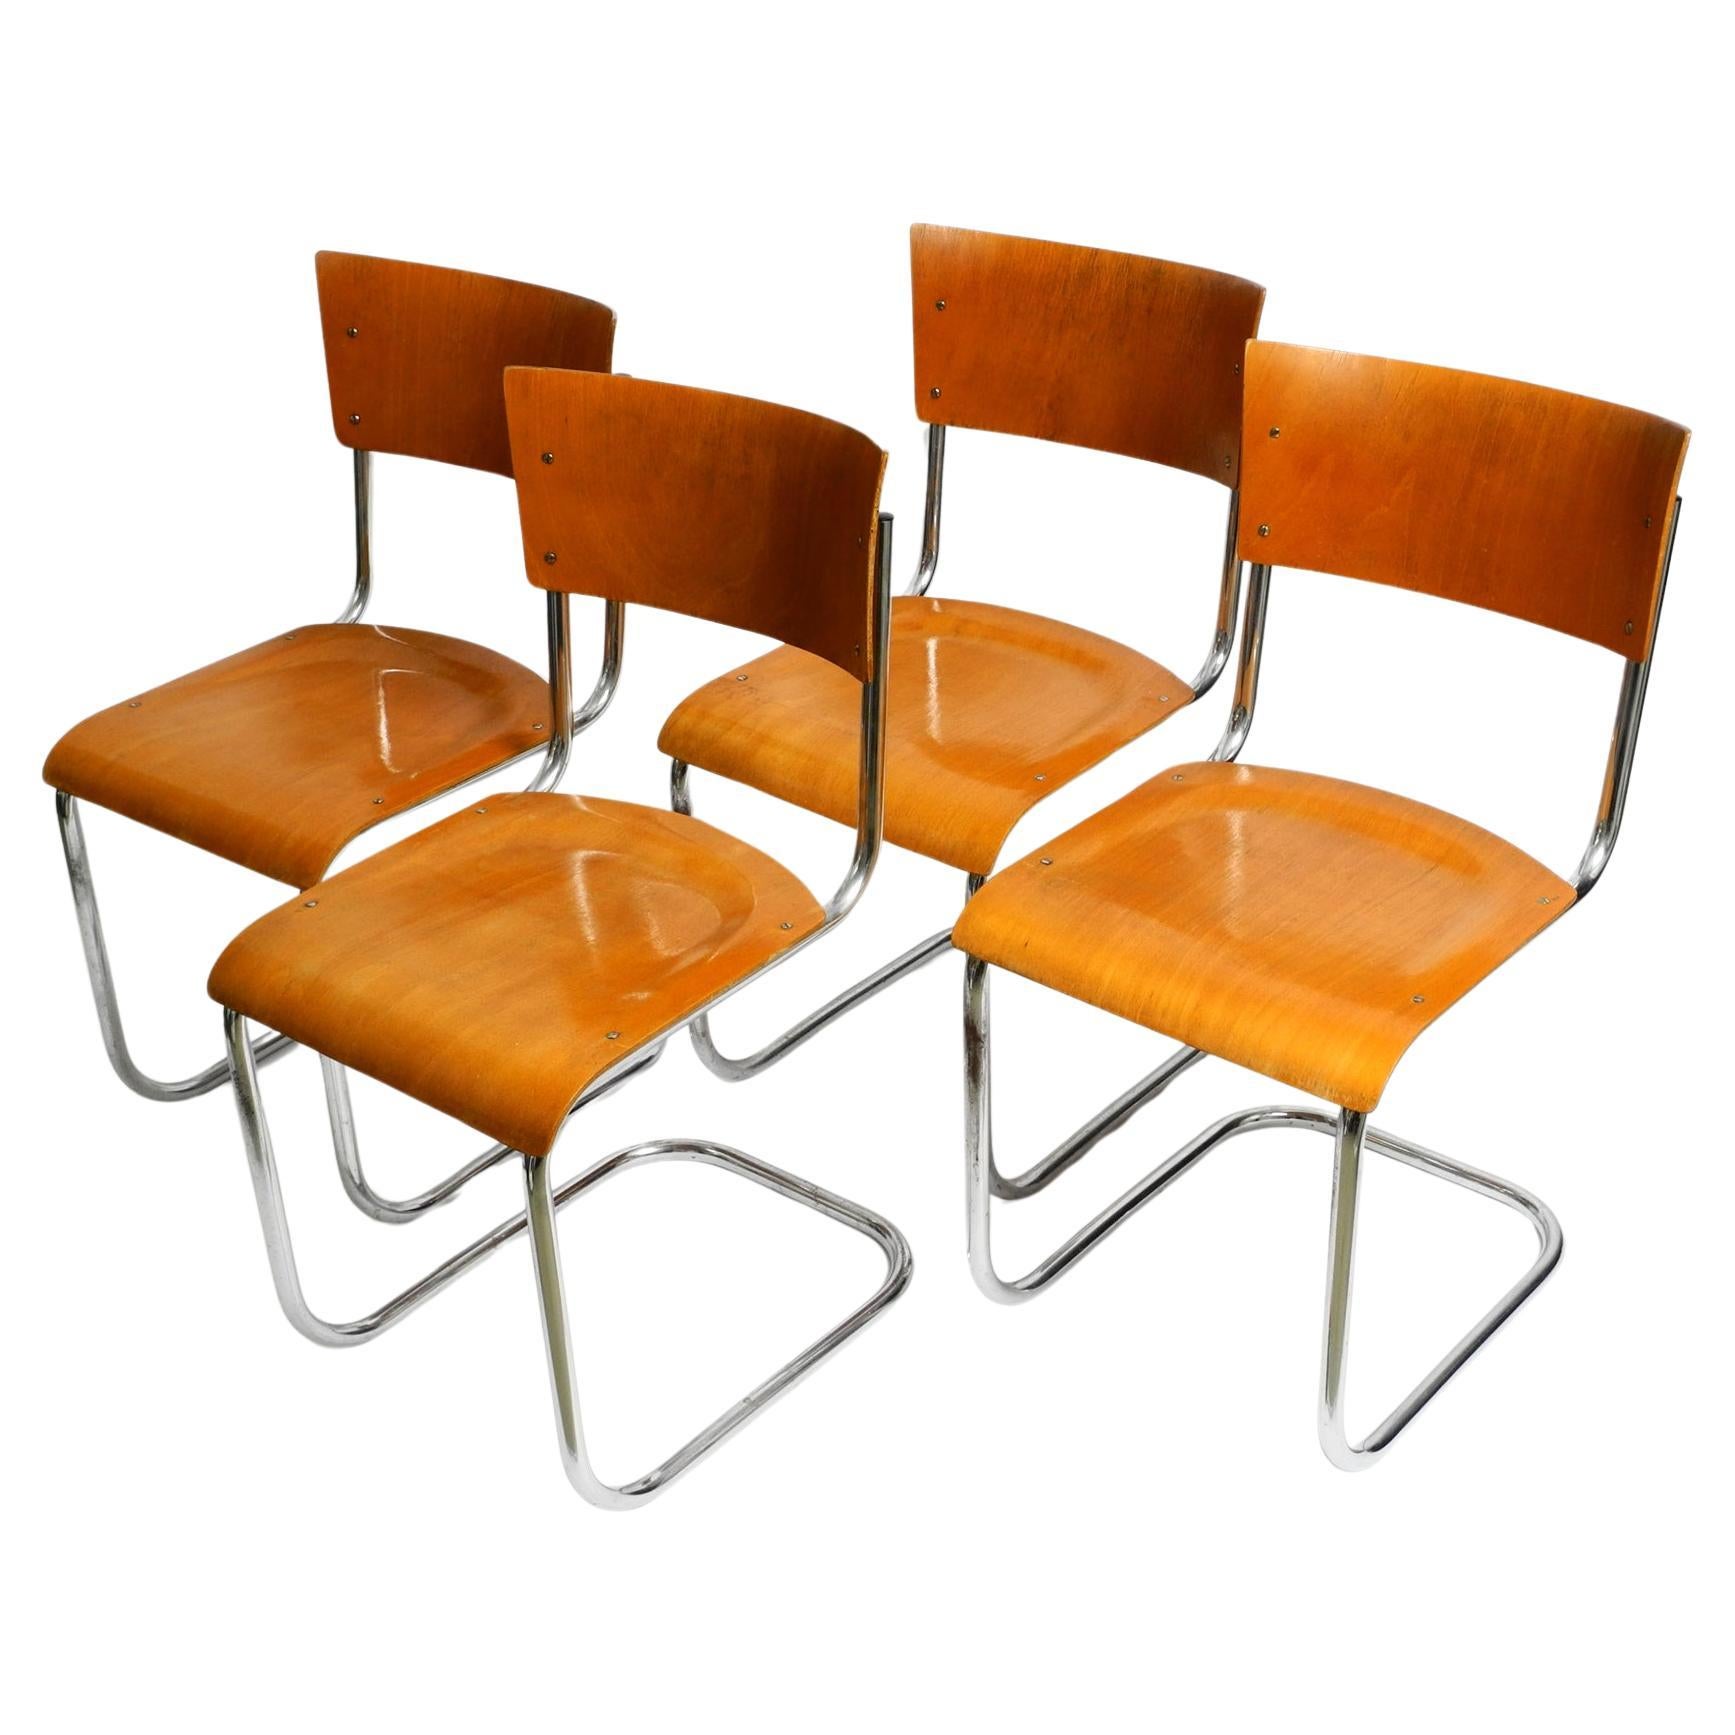 Four 30s cantilever Bauhaus tubular steel chairs by Mart Stam for Robert Slezak For Sale